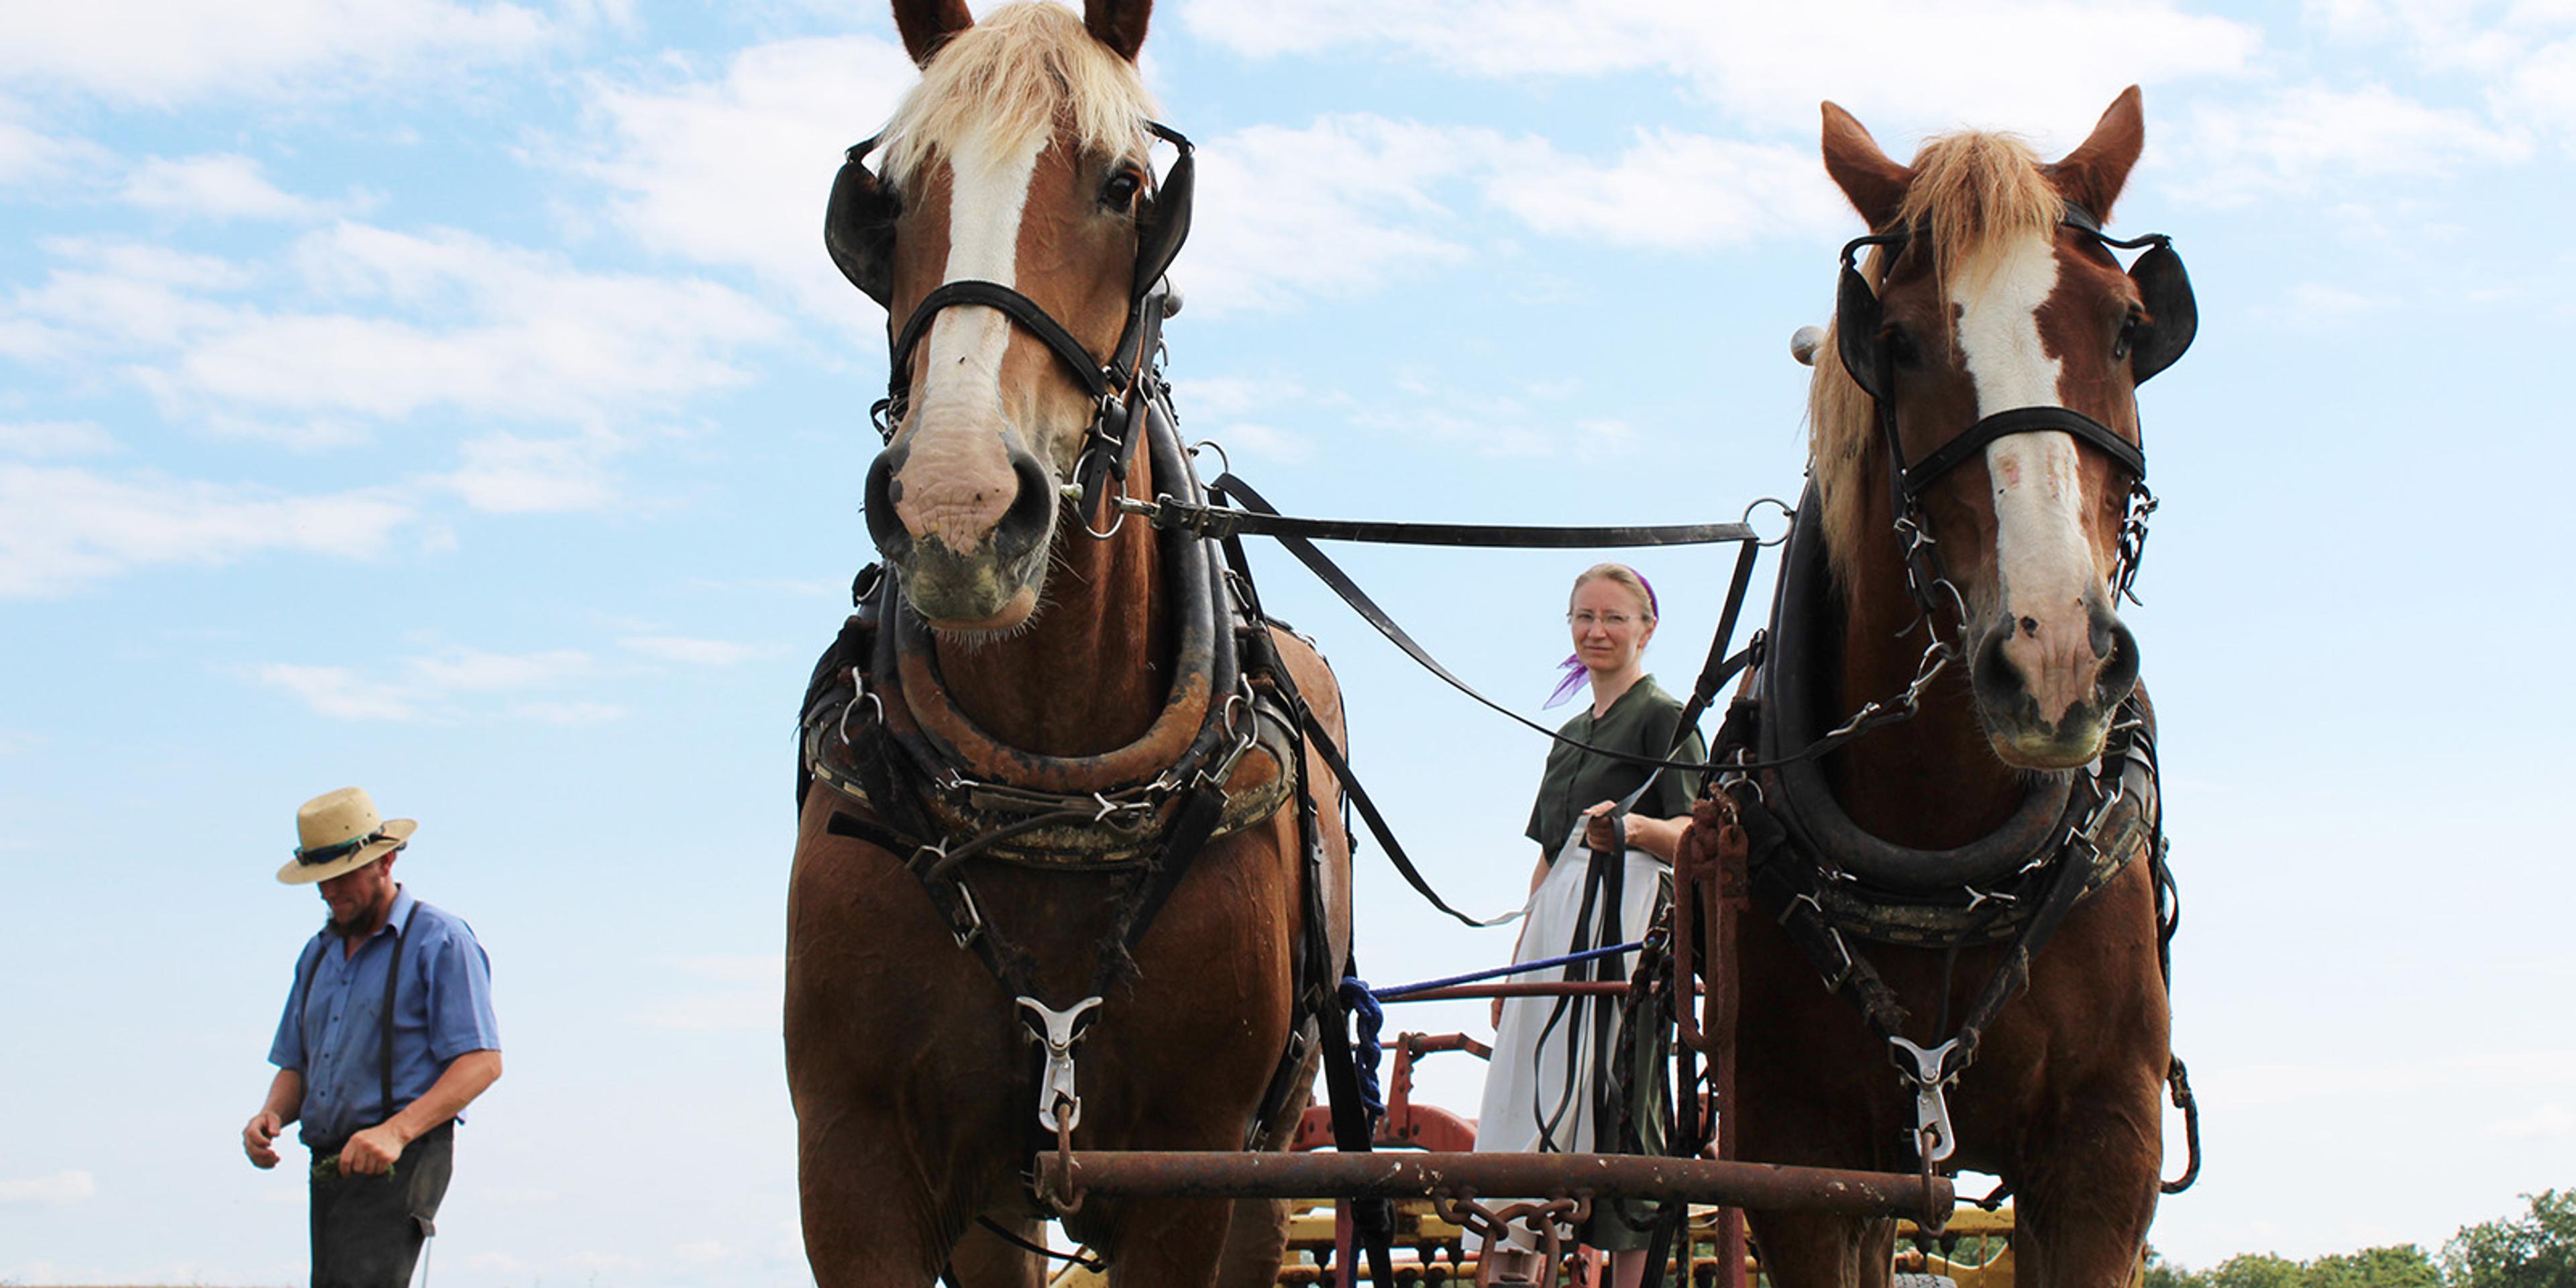 An Amish man and woman in the field with two workhorses.